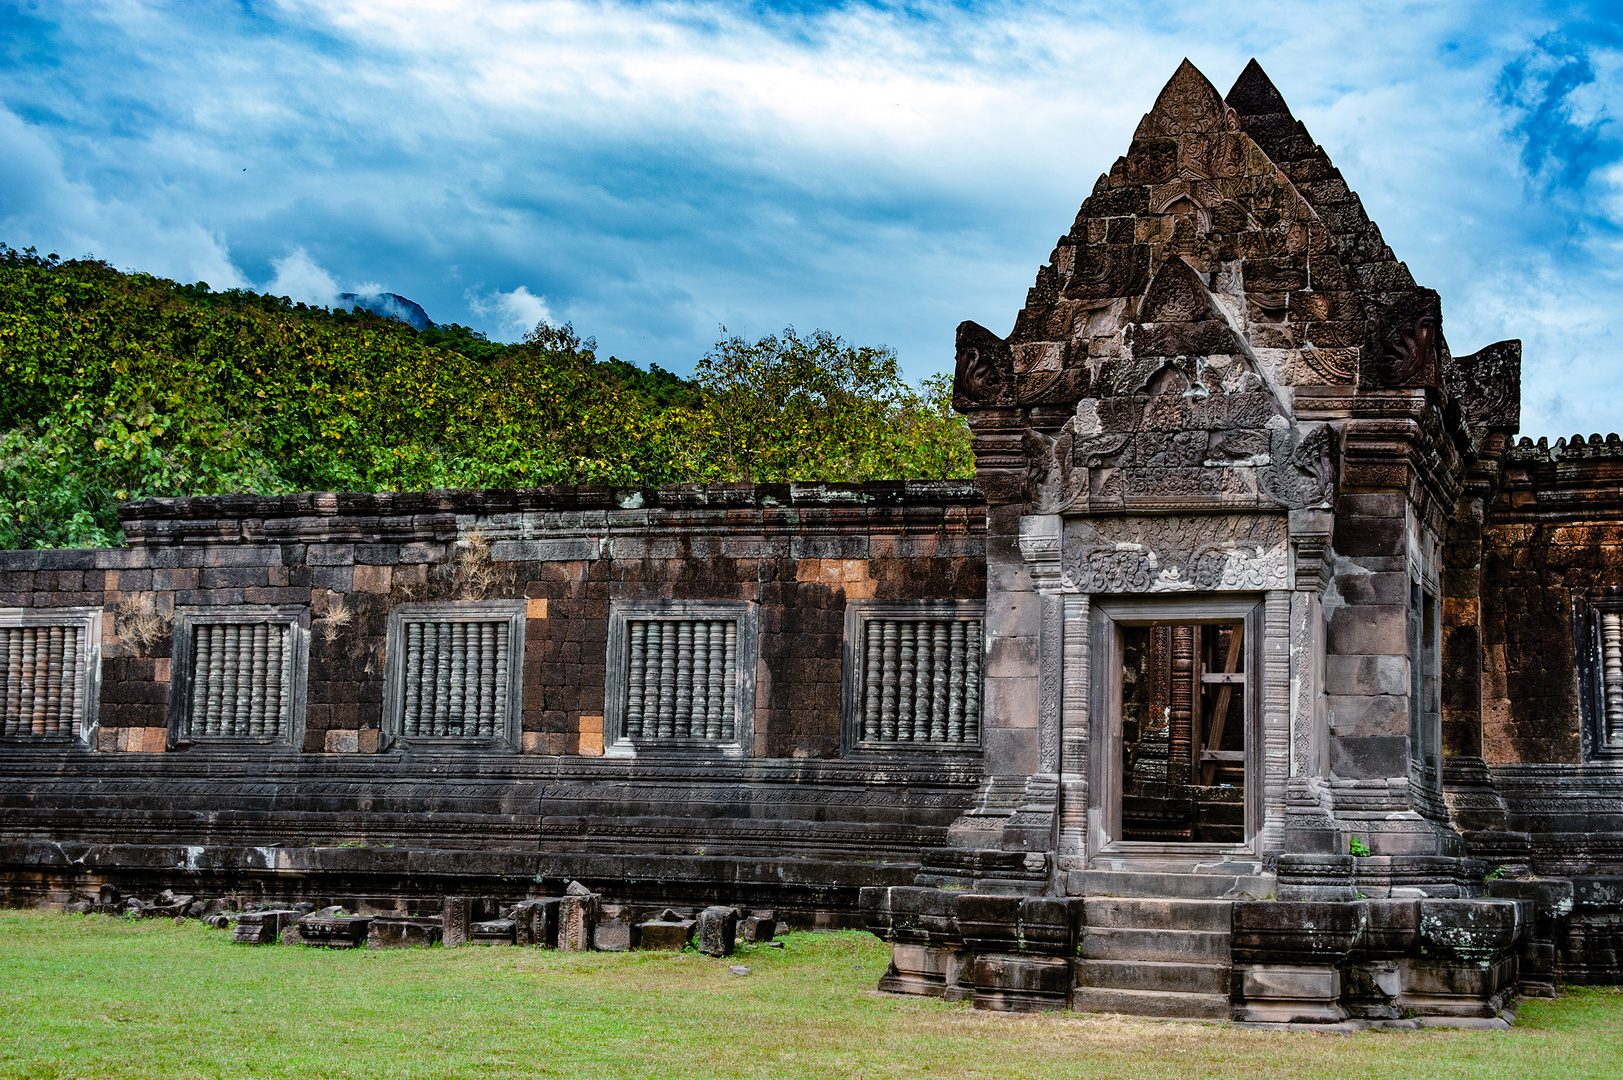 Northern palace in Wat Phou complex